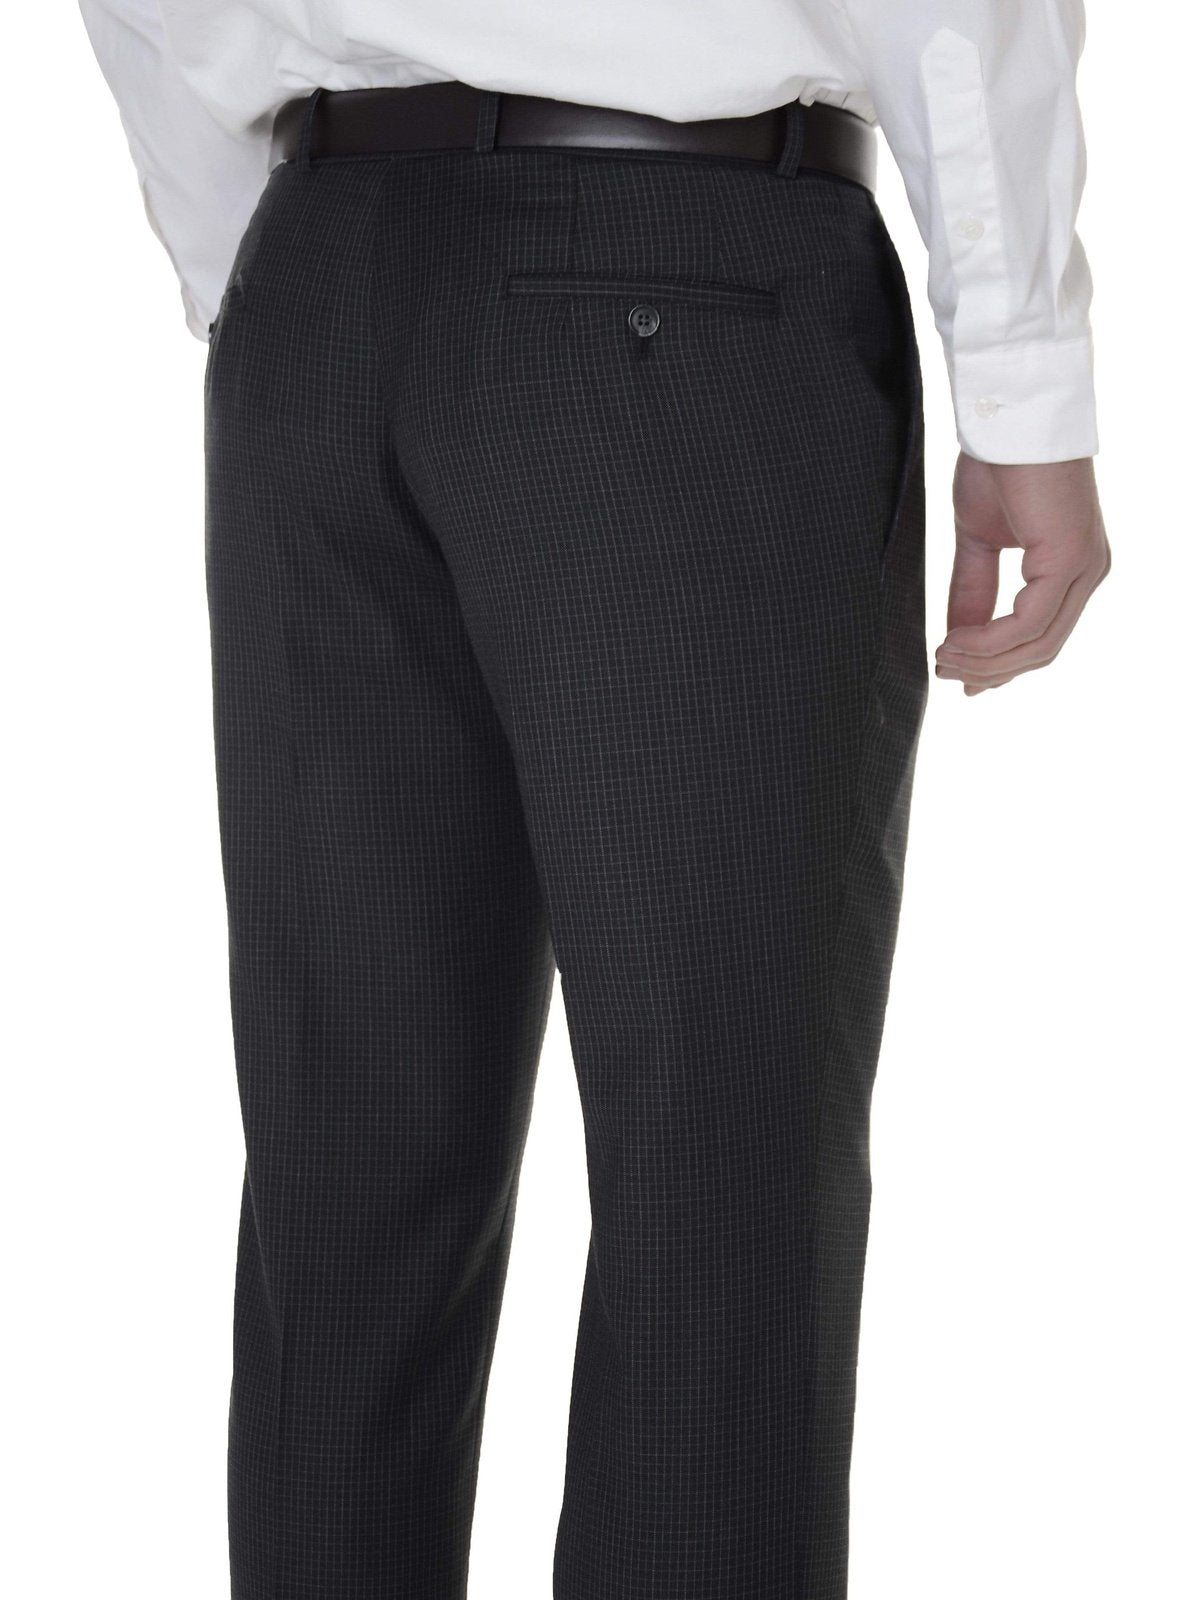 Mens sz 32x30 pleated dress pants in Gray wool mix by Louis